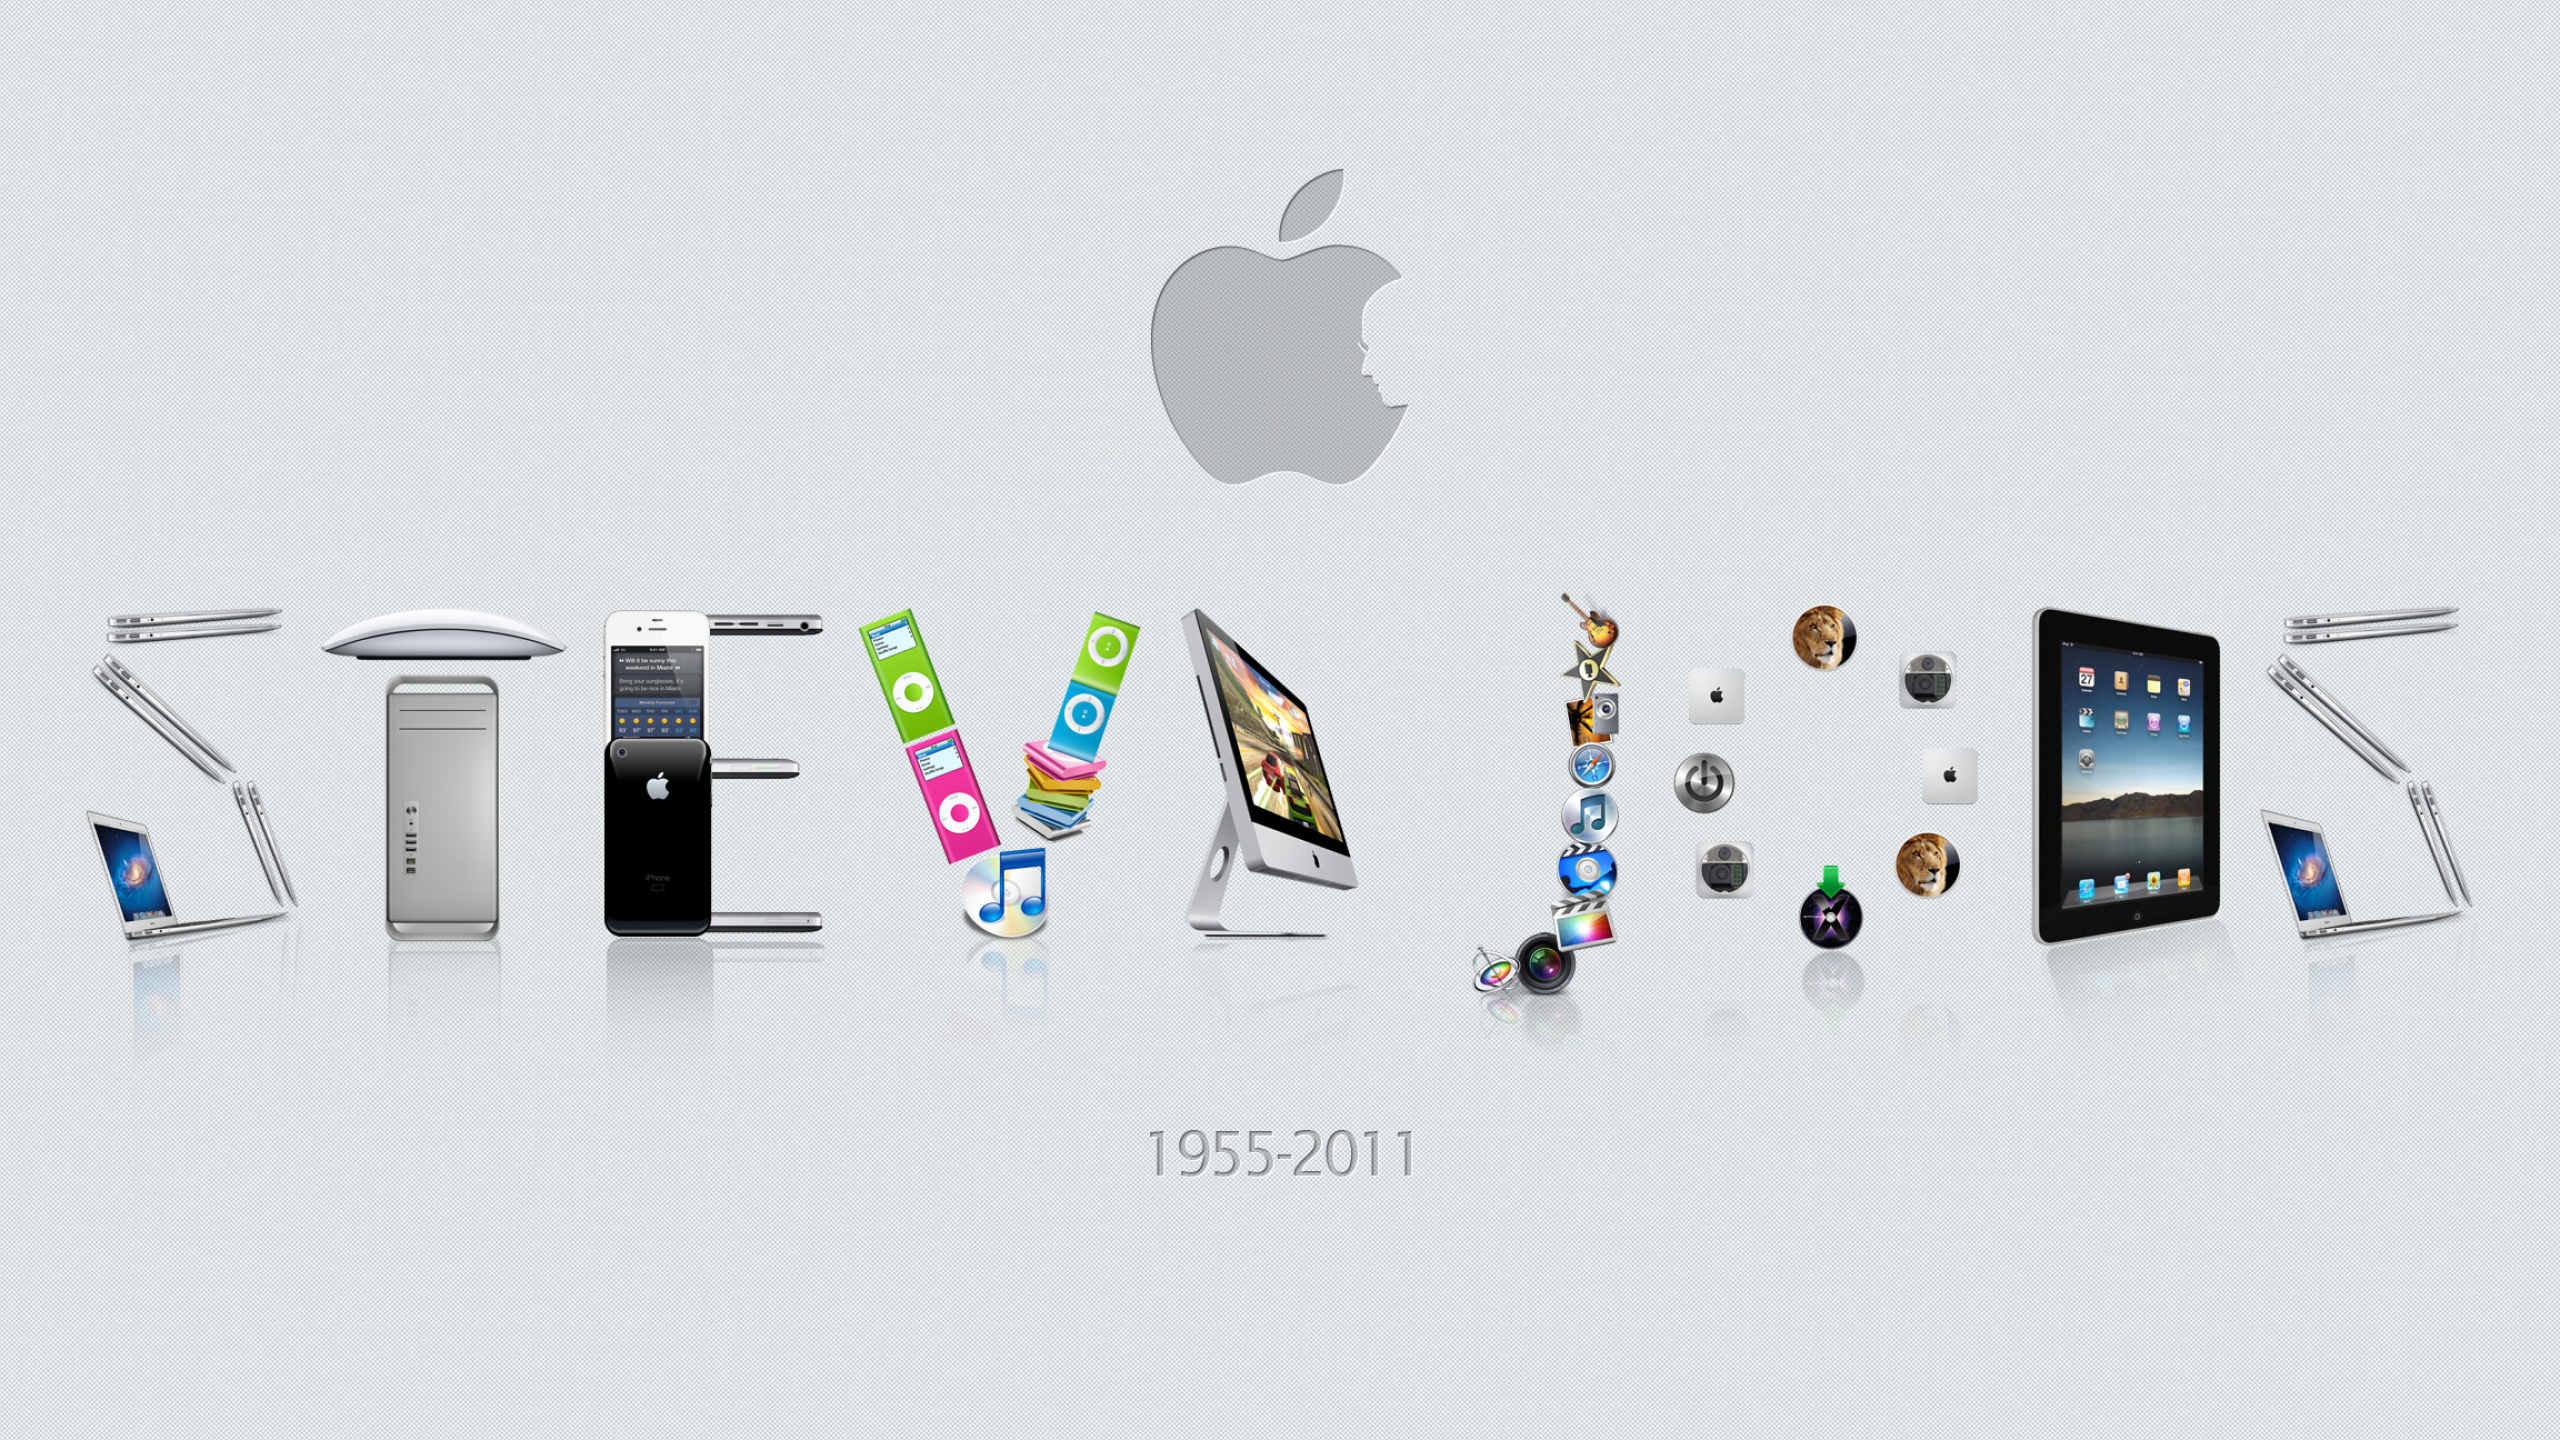 Steve Jobs: The co-founder of the Apple company, iMac, iTunes, iPod, iPhone, iPad. 2560x1440 HD Background.